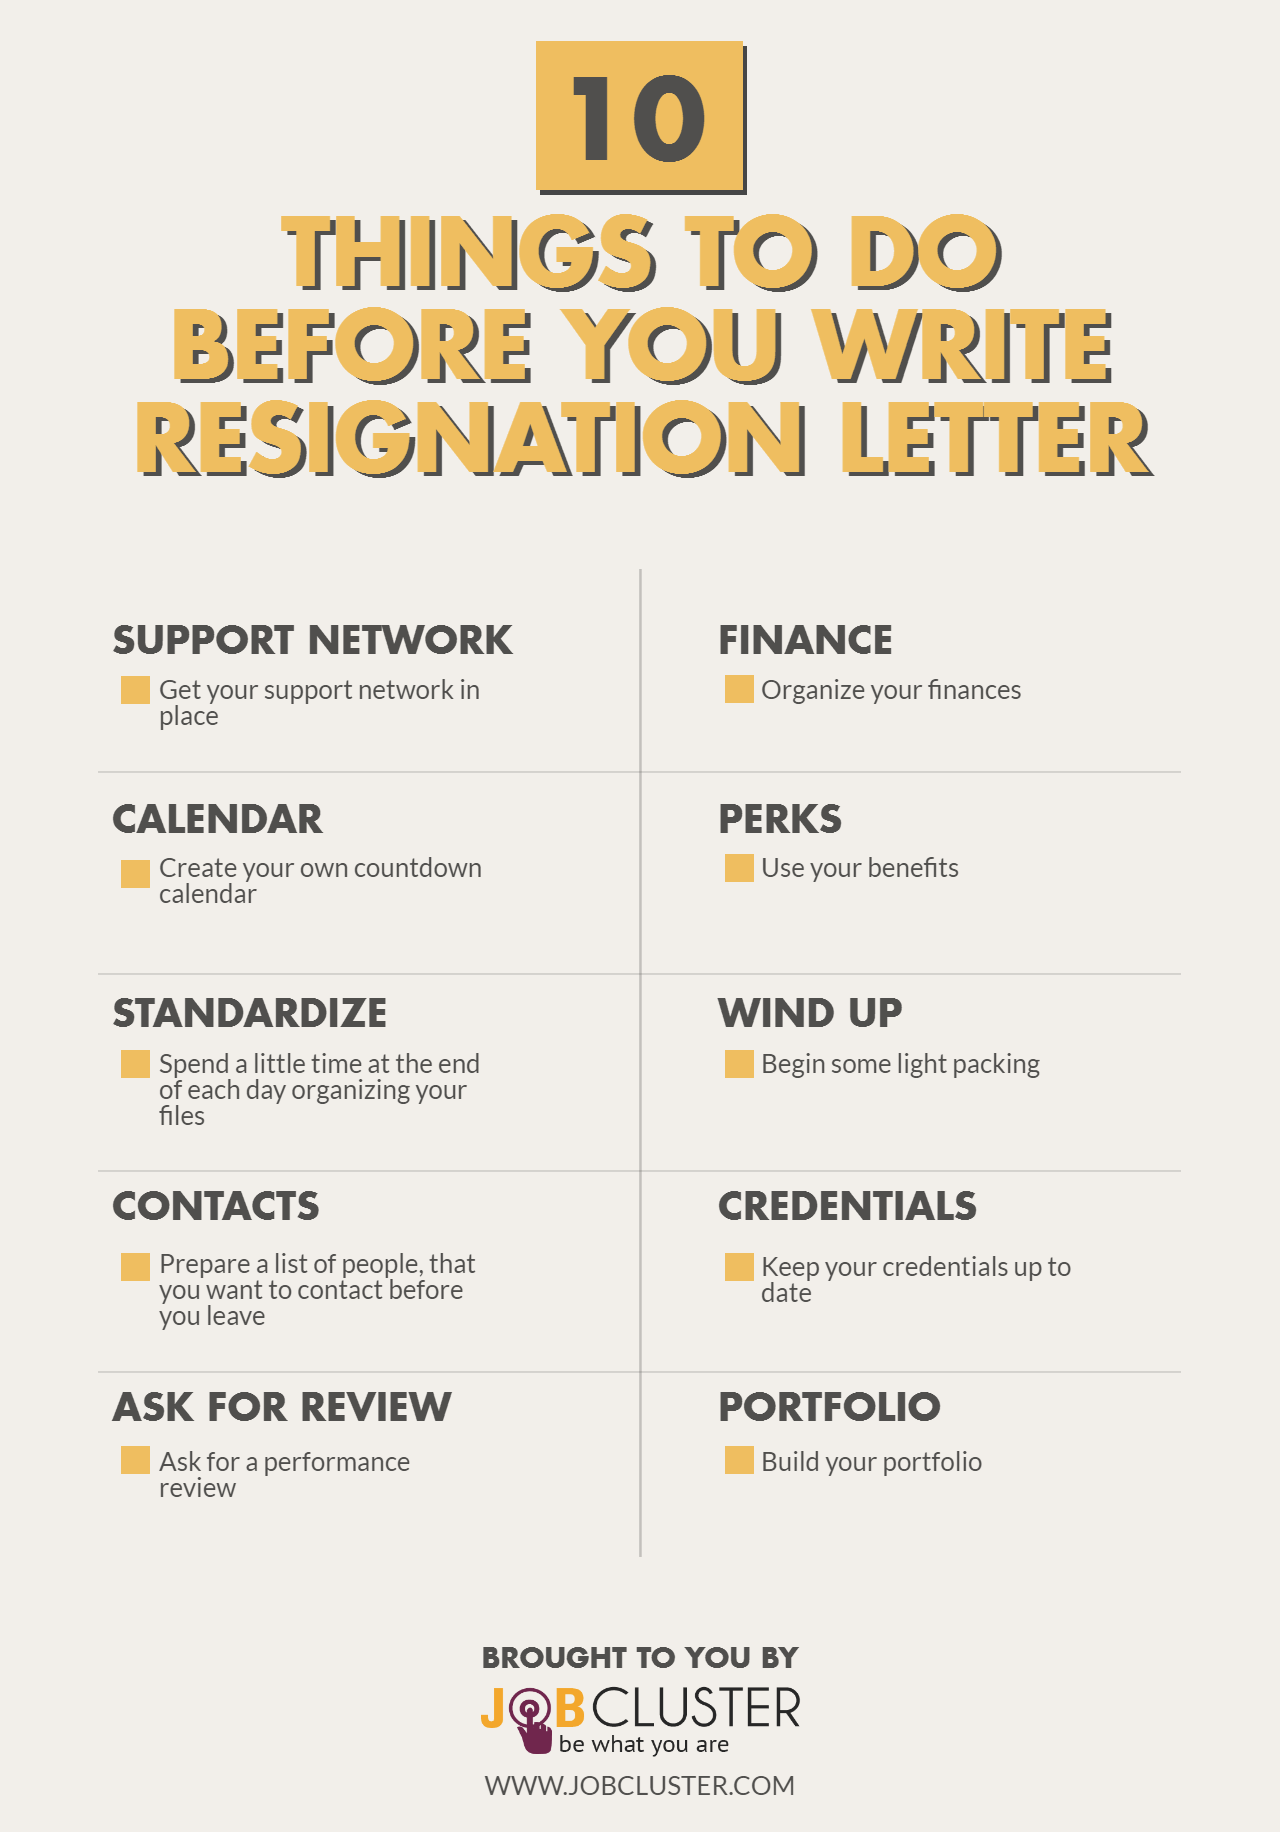 10 Things to do before writing the resign letter